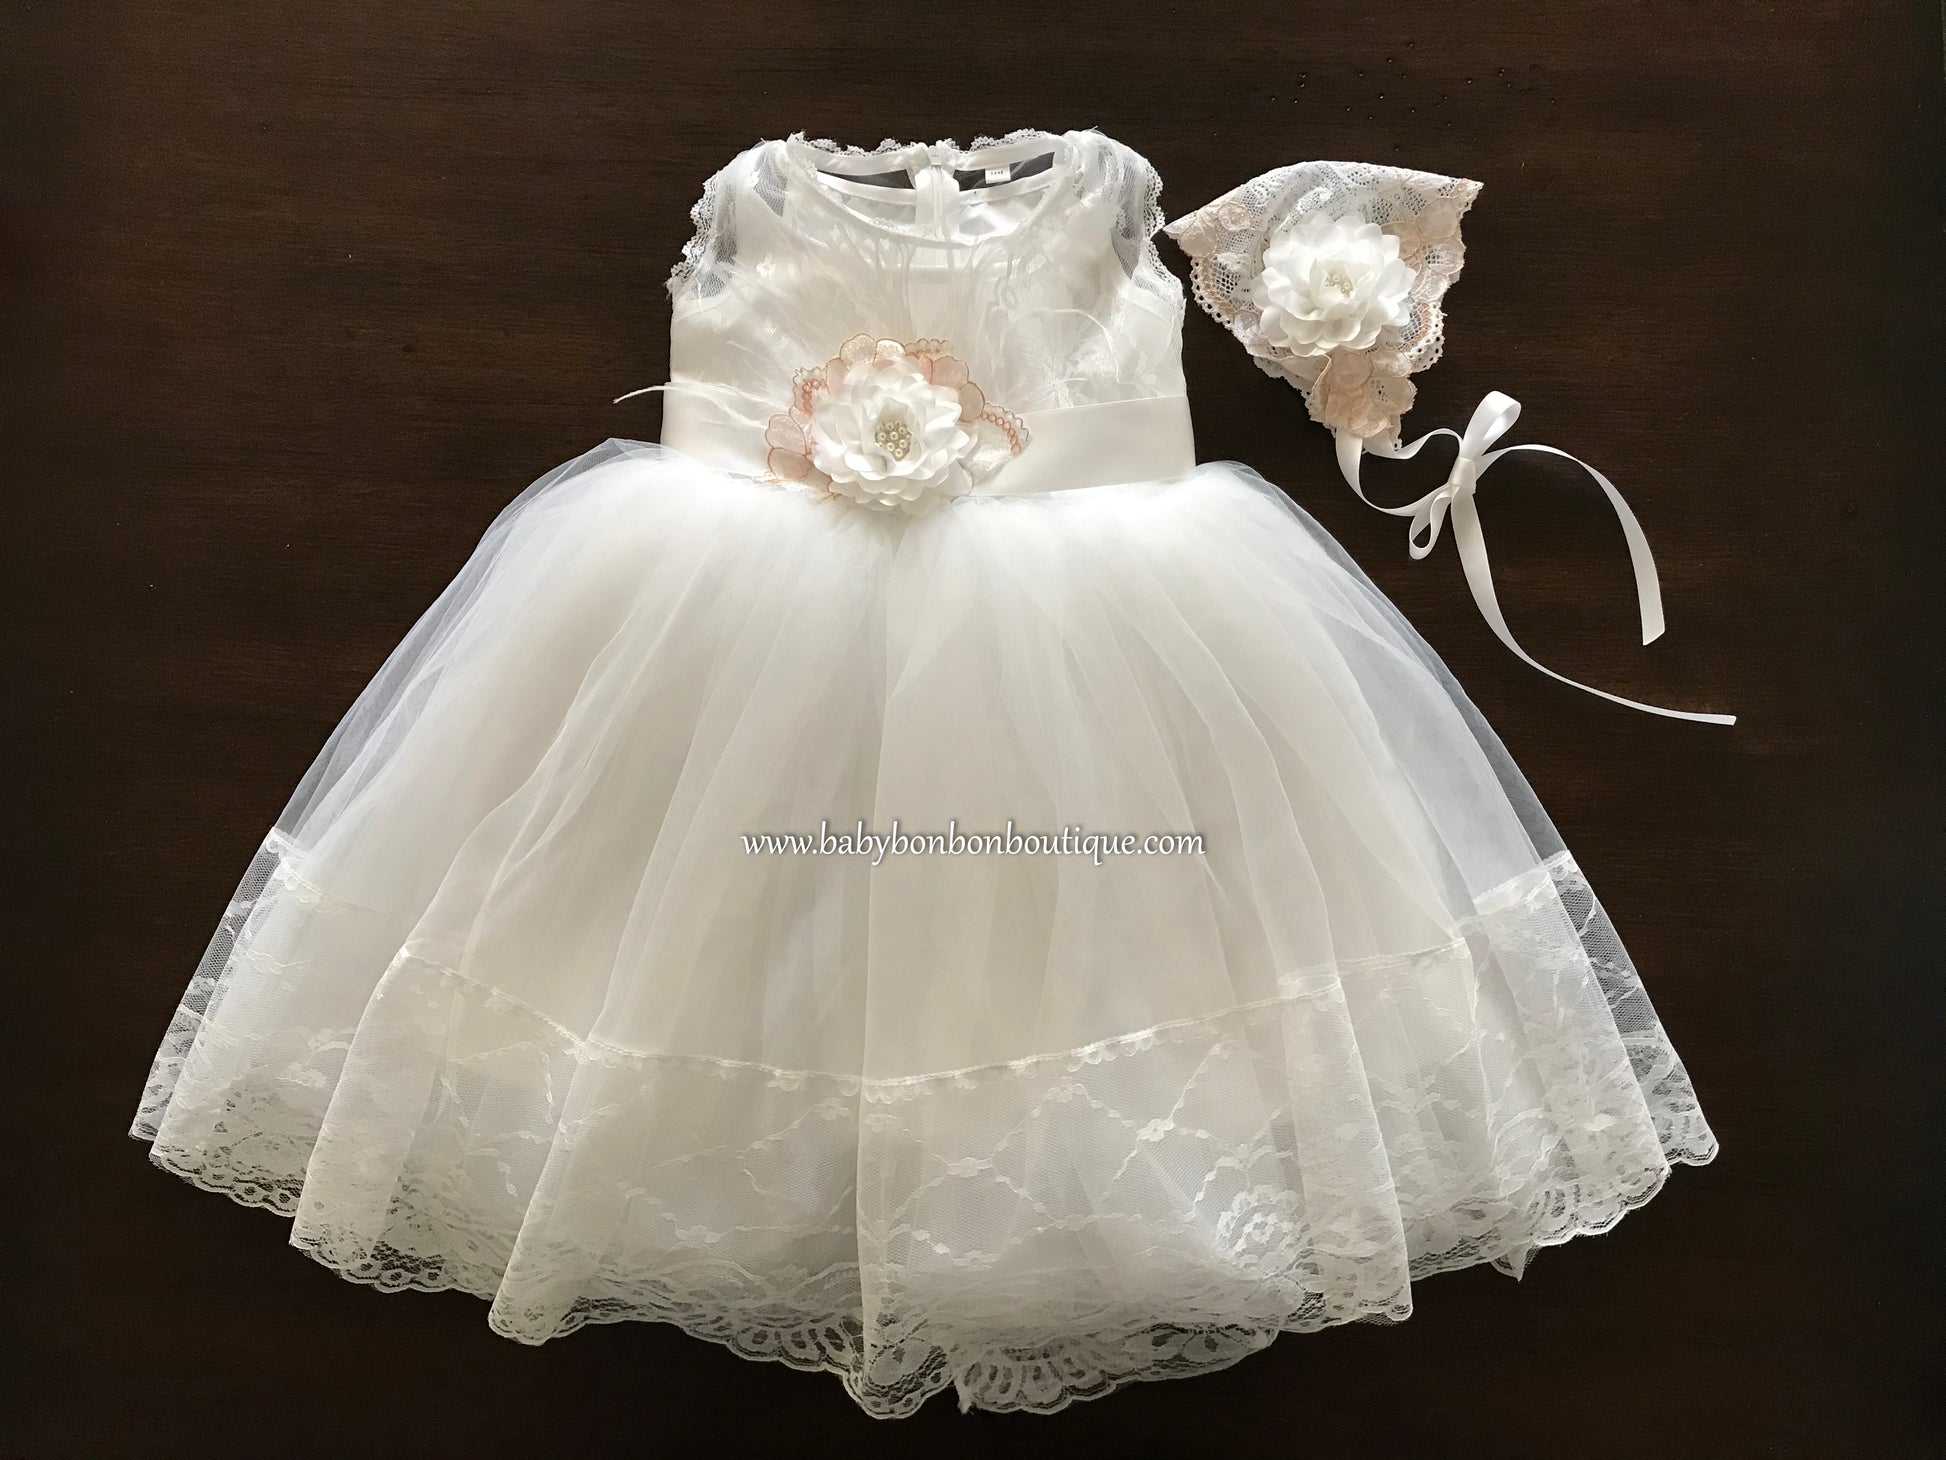 French White Baptism Dress with Flower Bonnet and Sash